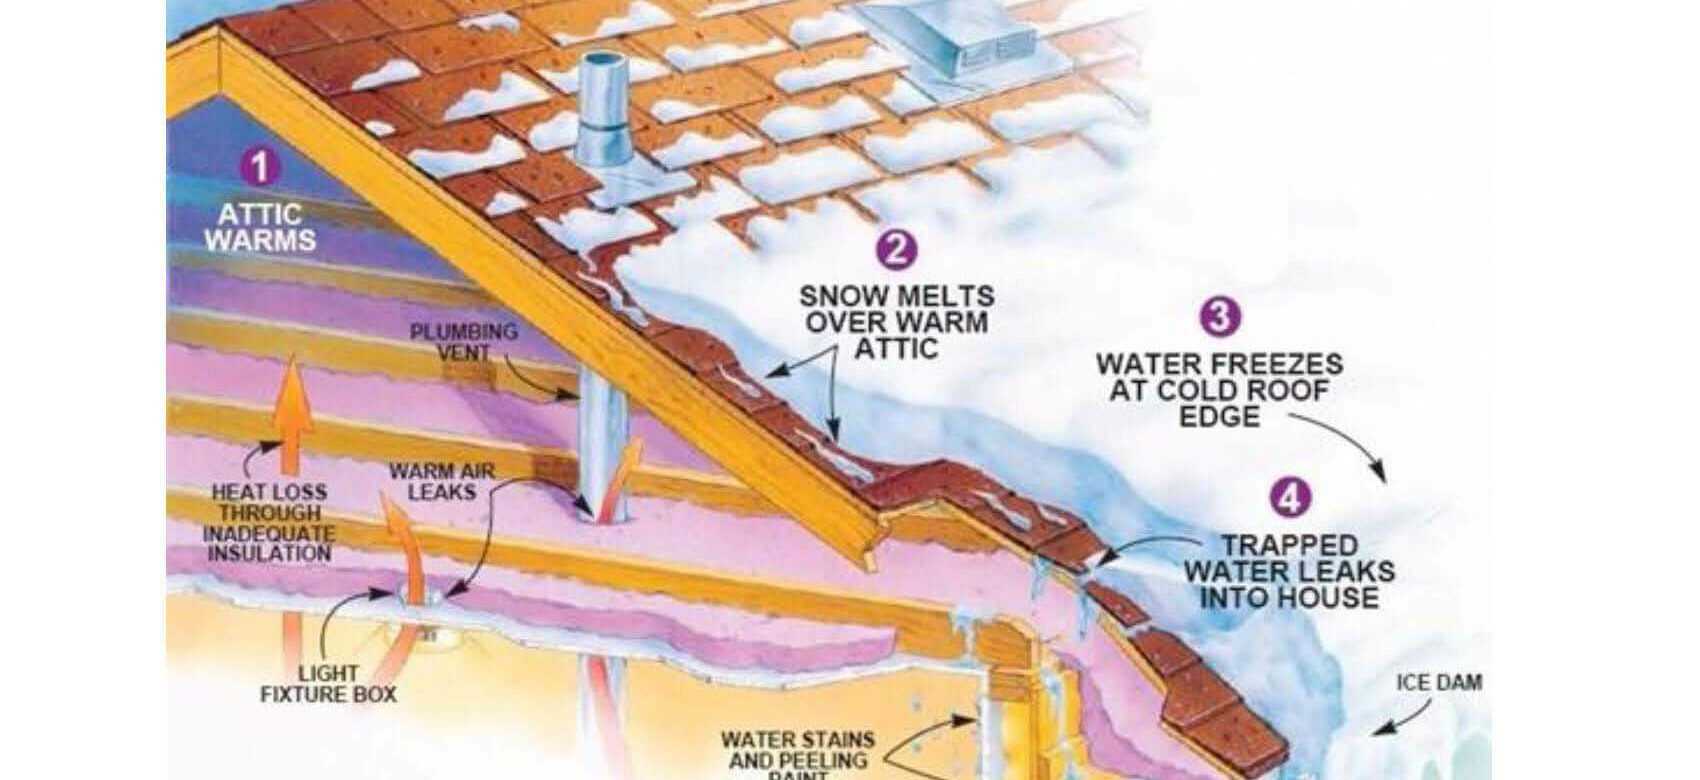 Warm over. Roof dam. If you Heat Ice it Melts. Ice and Water Barrier on the Roof. Ice on the Edge of the Roof in Winter.